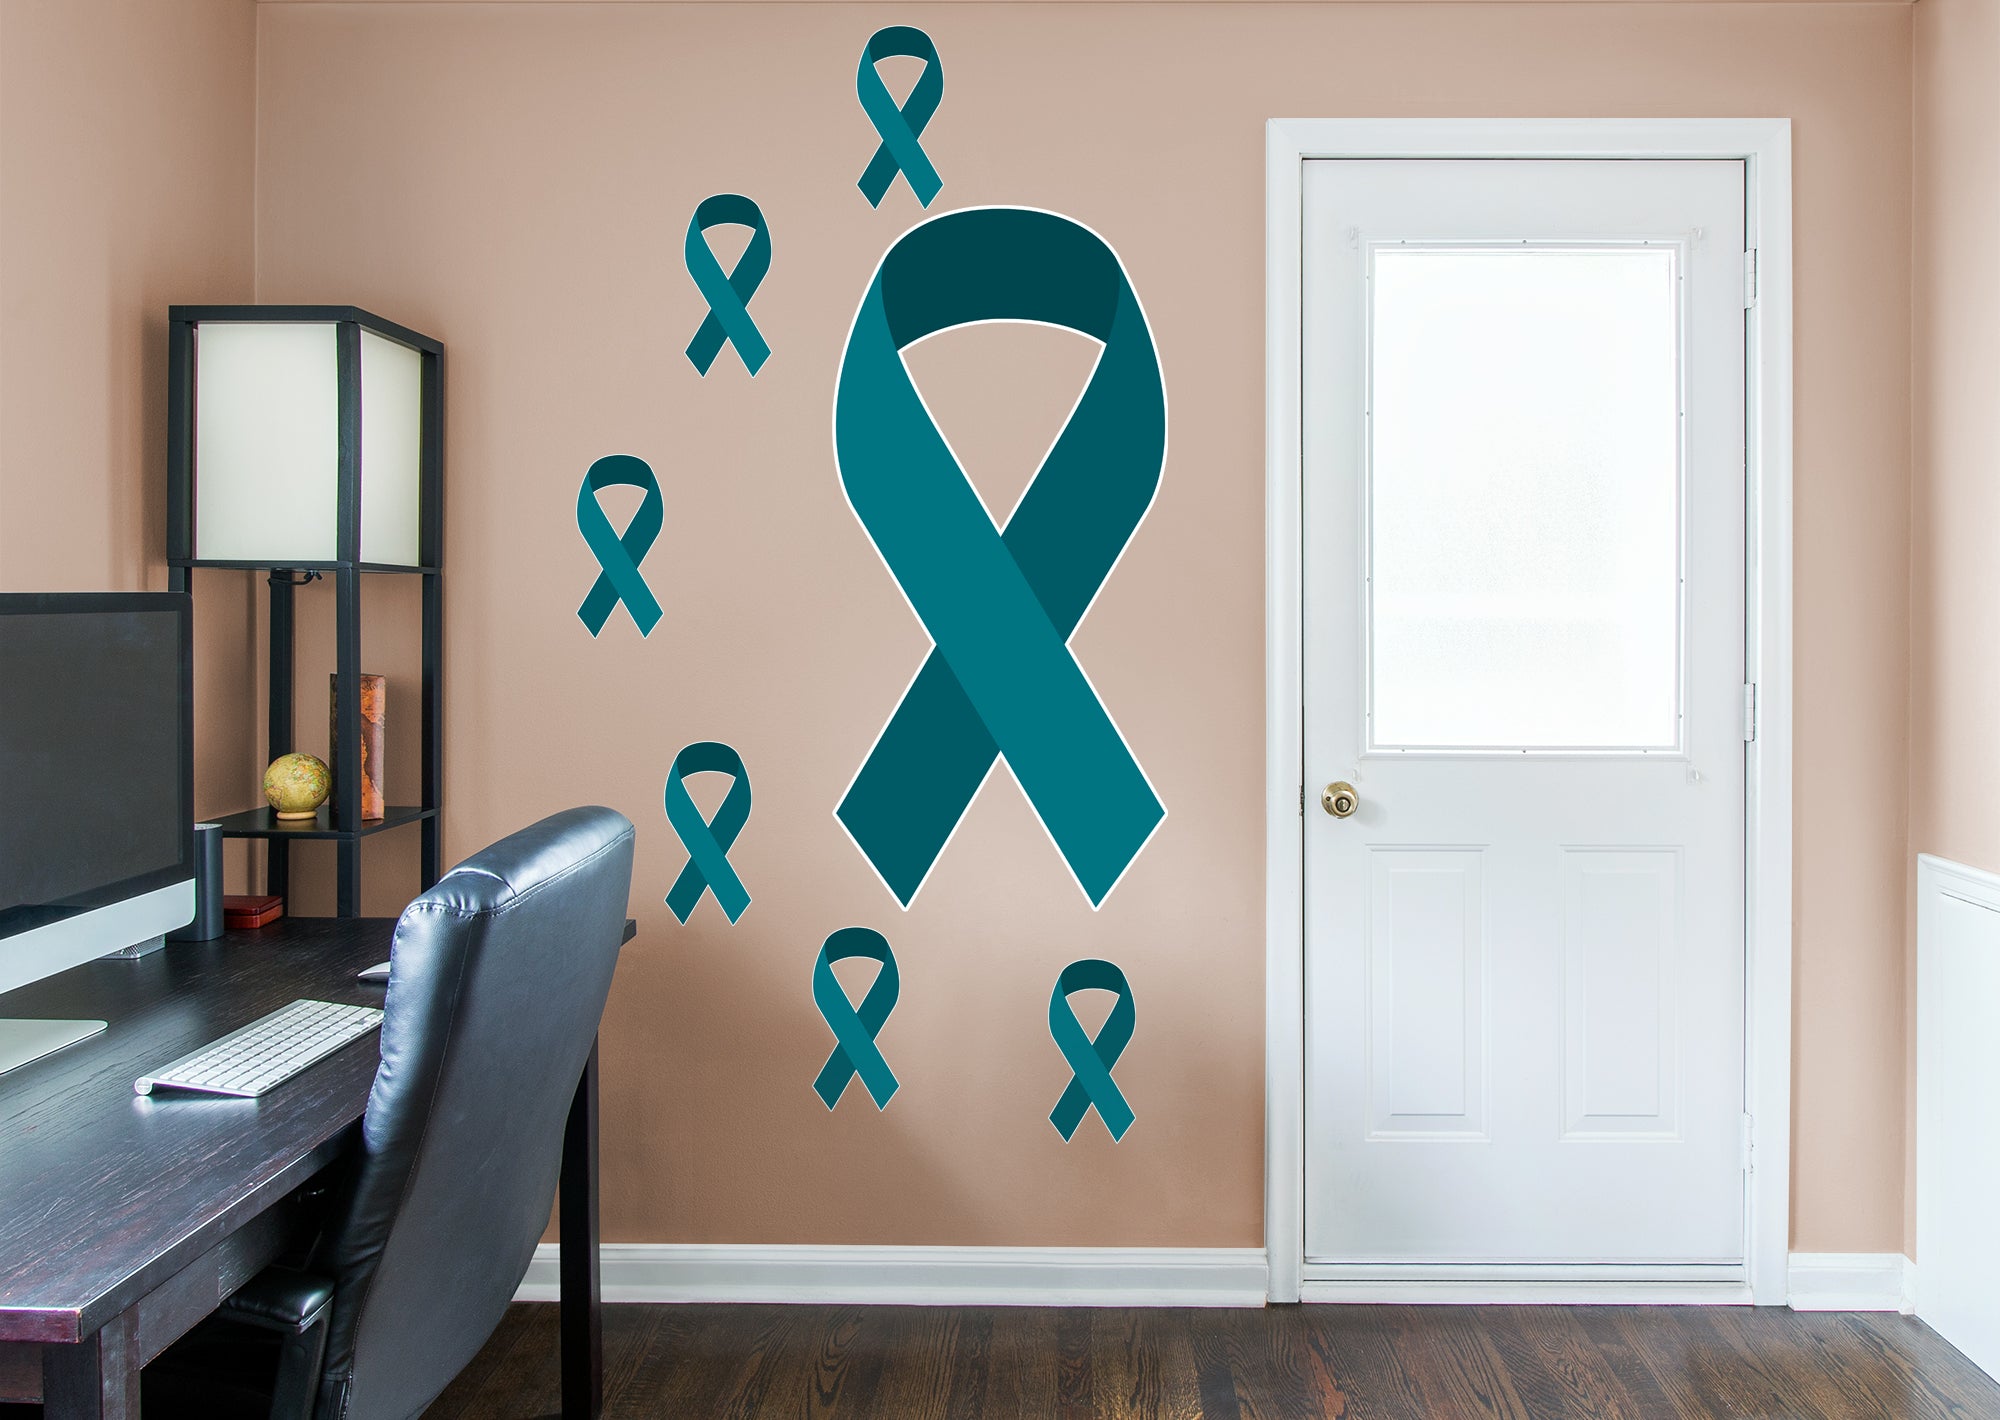 Colors of Cancer Ribbons: American Cancer Society Removable Wall Decal Giant Ovarian Cancer Ribbon + 6 Decals (24"W x 51"H) by F